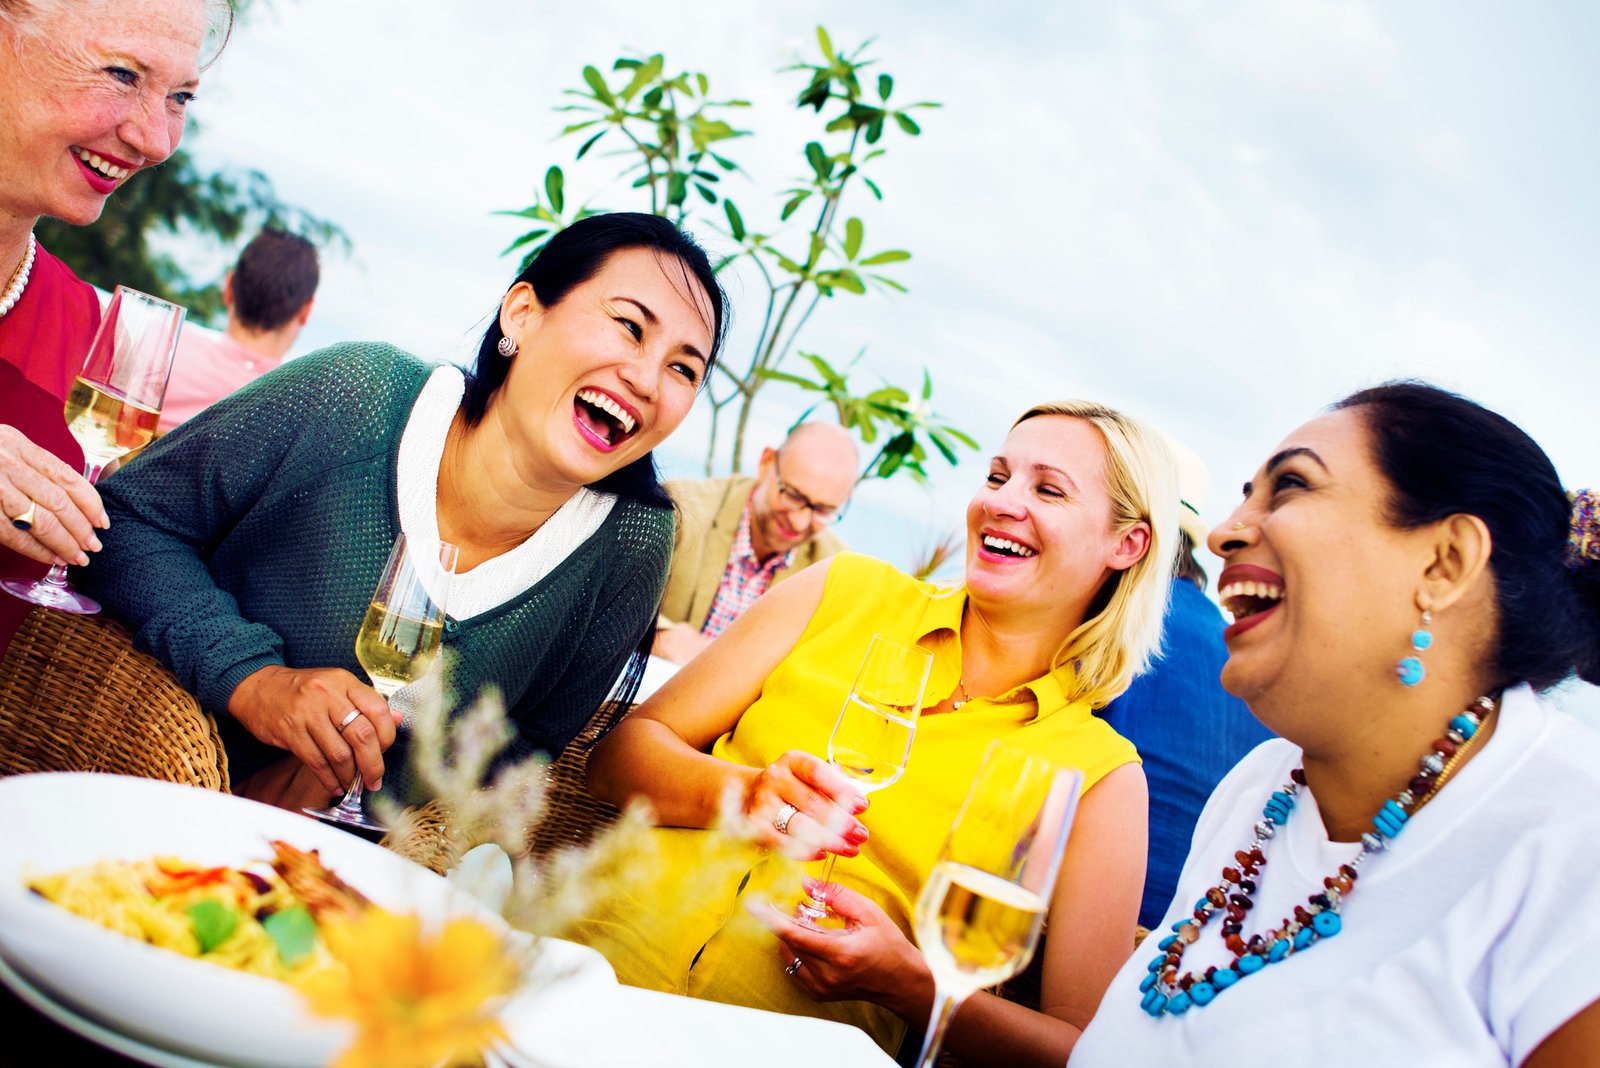 Diverse People Luncheon Outdoors Hanging out Concept